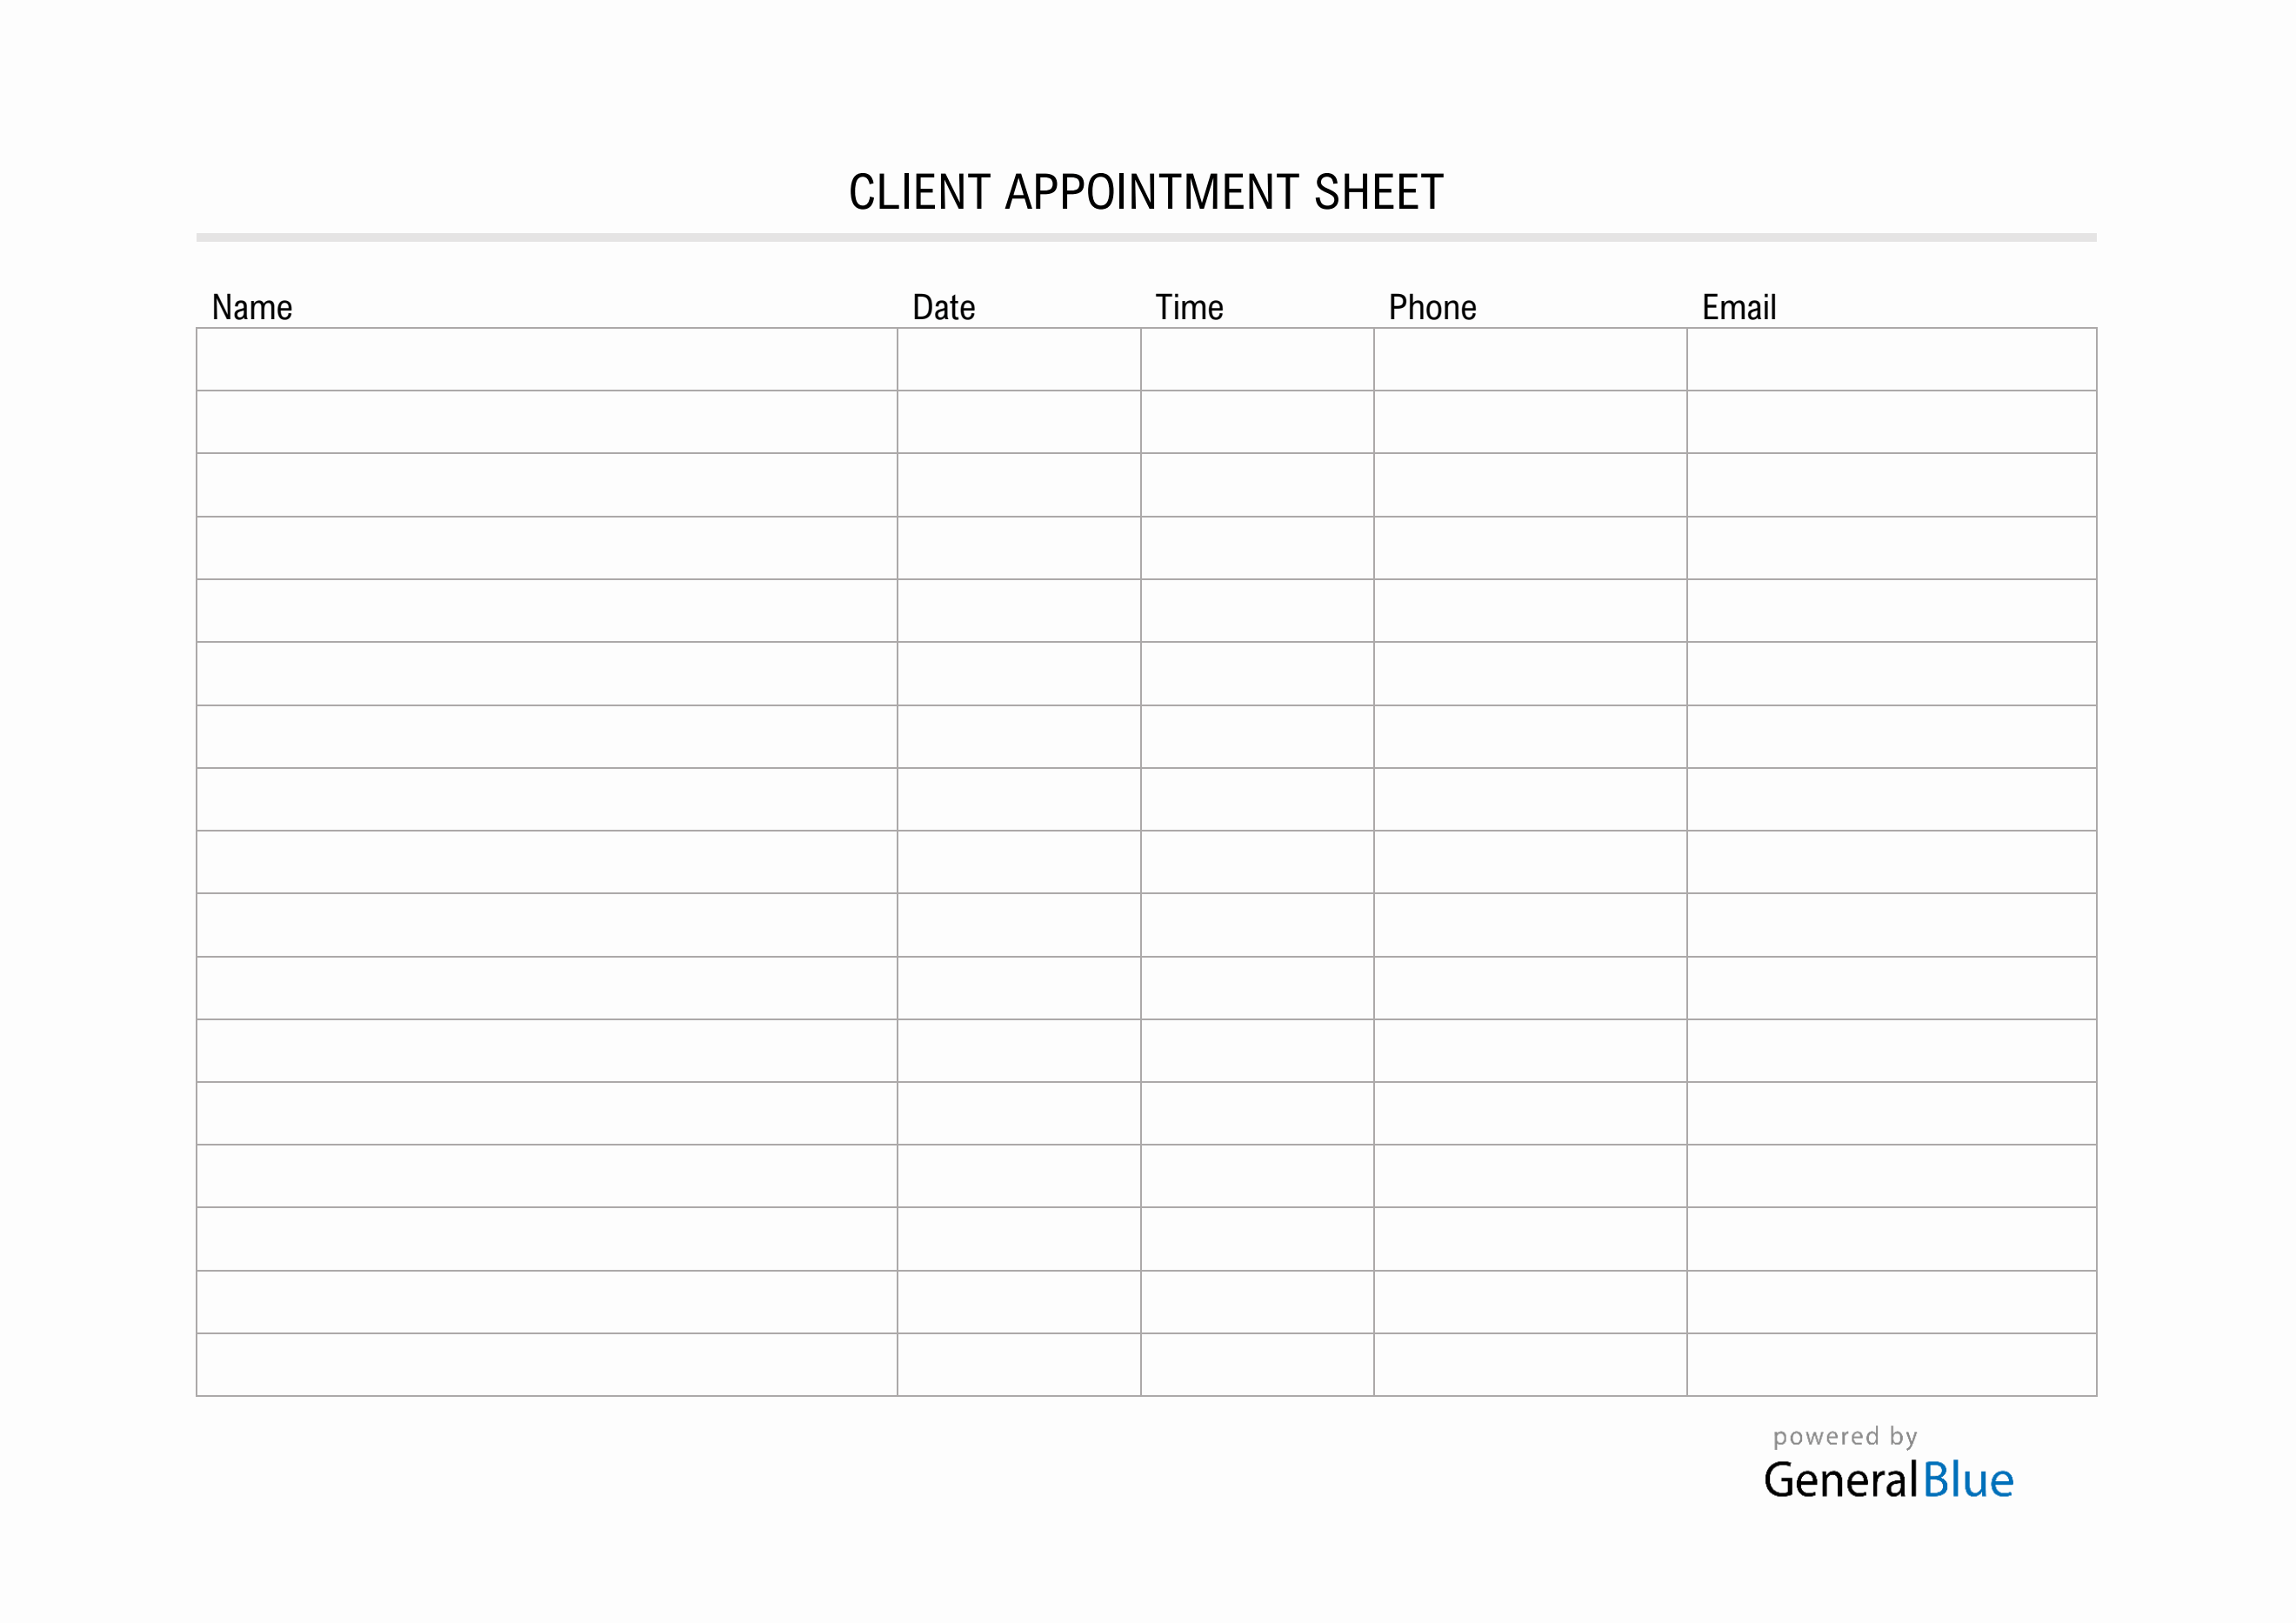 client-appointment-sheet-template-in-pdf-basic